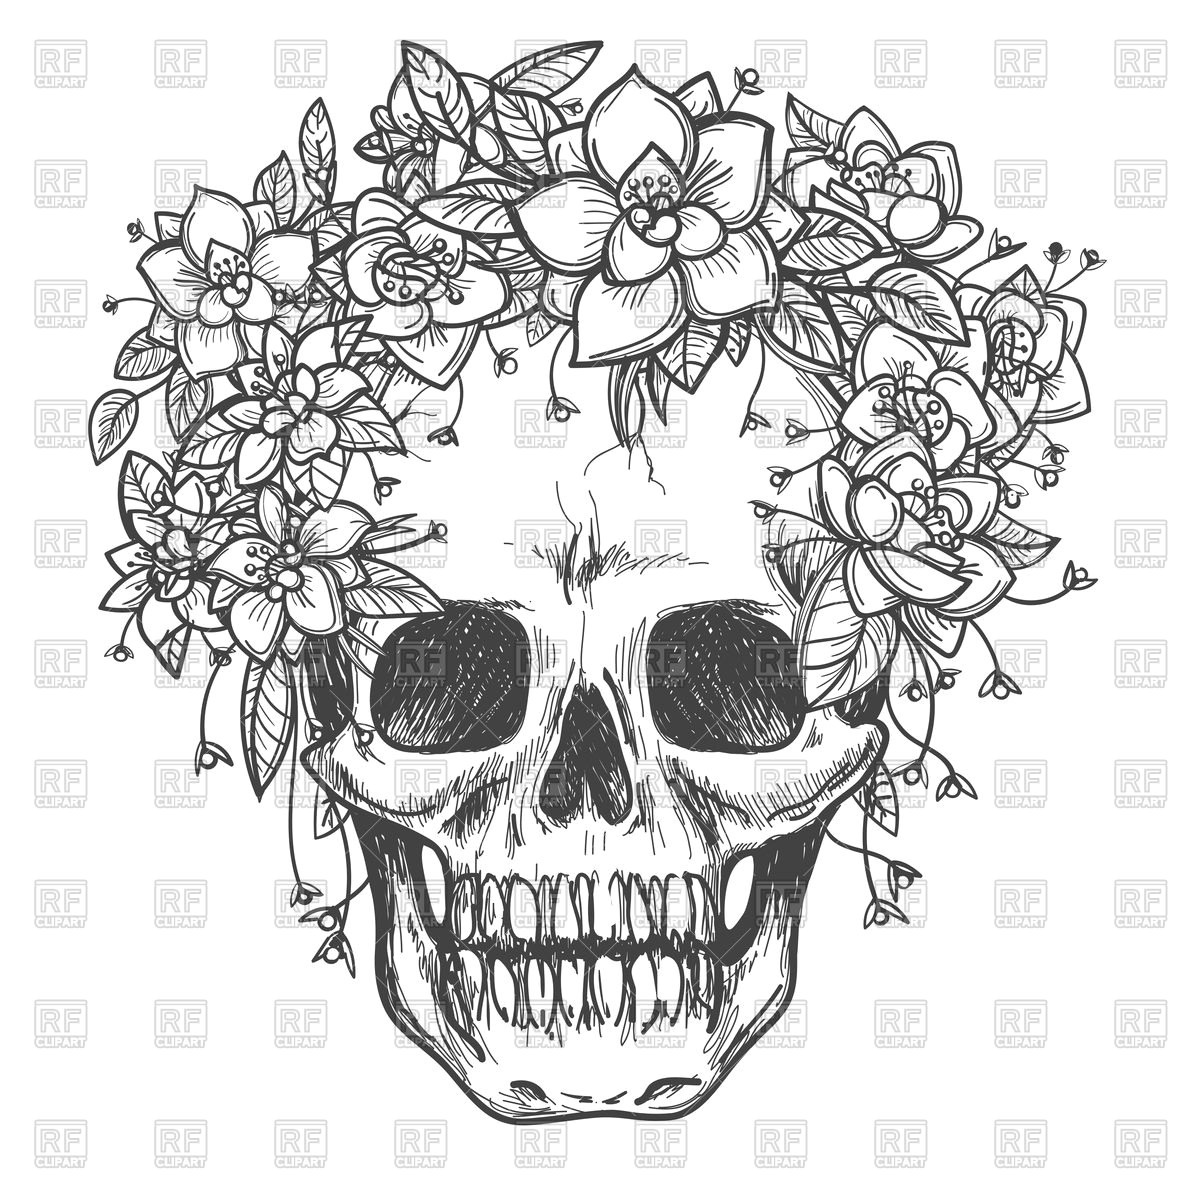 hand drawing dead skull with rose flowers vector image vector illustration of people a c vectortatu click to zoom